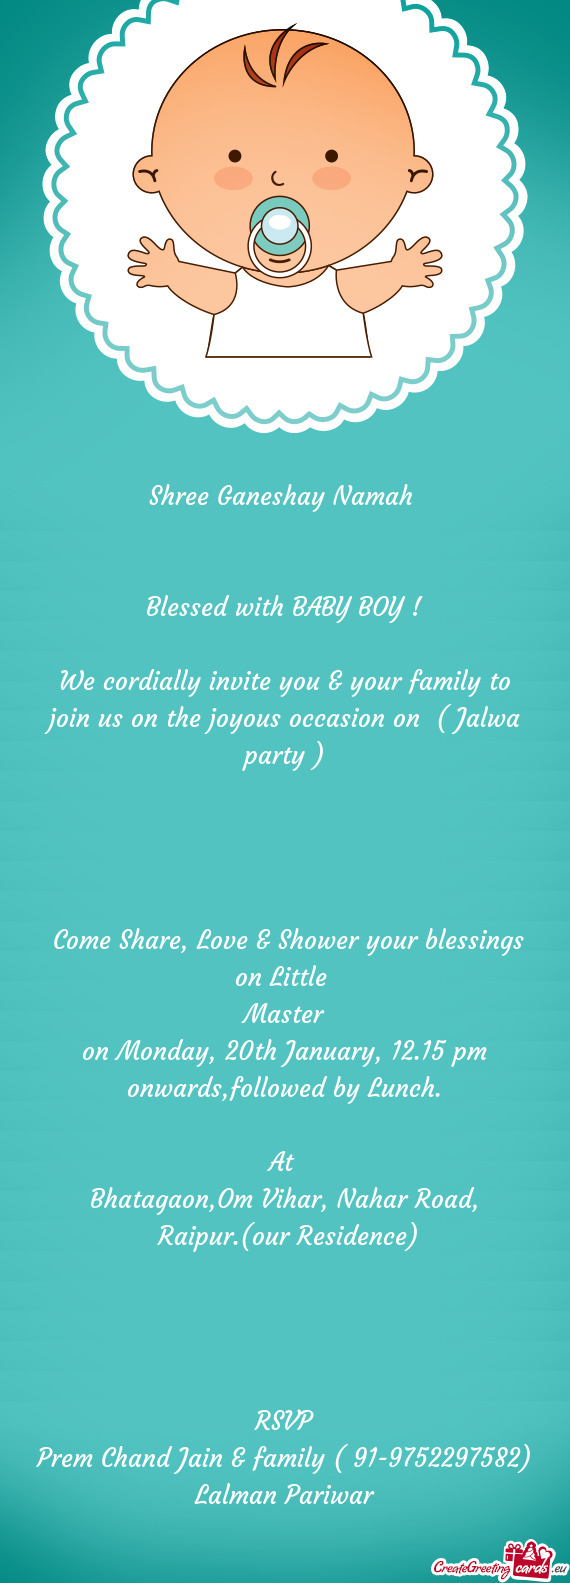 Come Share, Love & Shower your blessings on Little